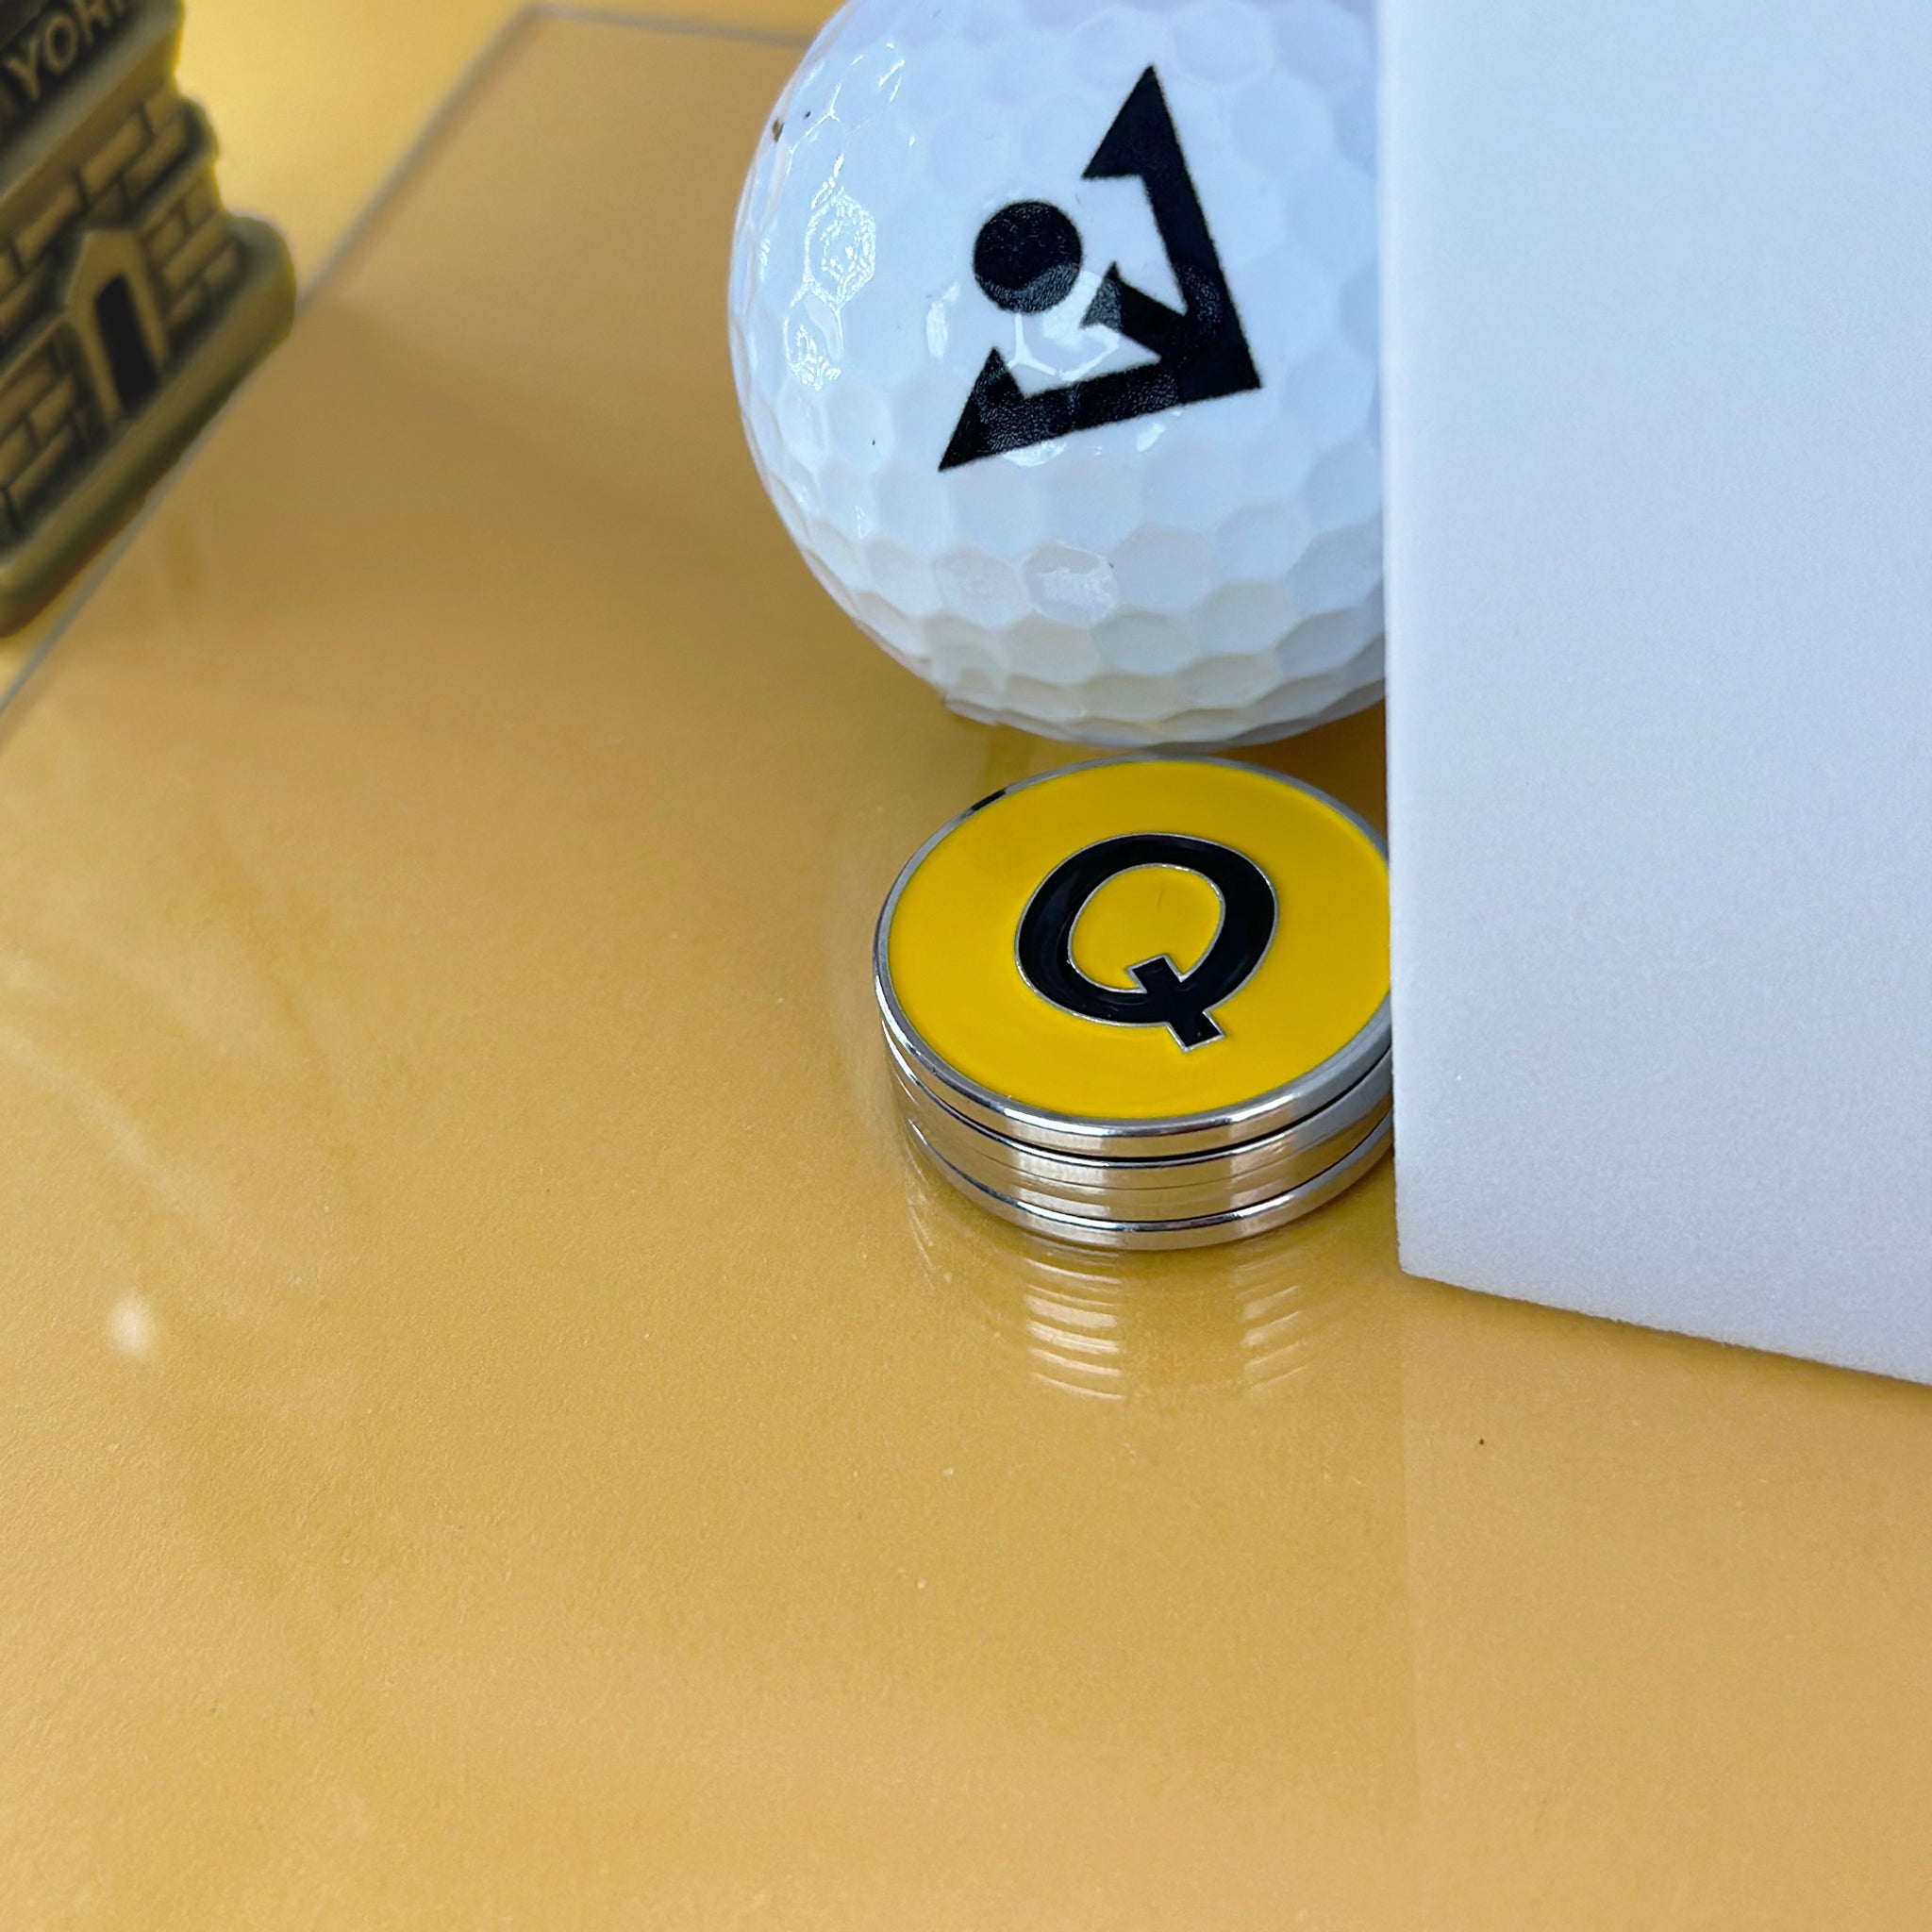 Q Train logo magnetic golf ball marker, with Statue of Liberty in a gold backdrop.